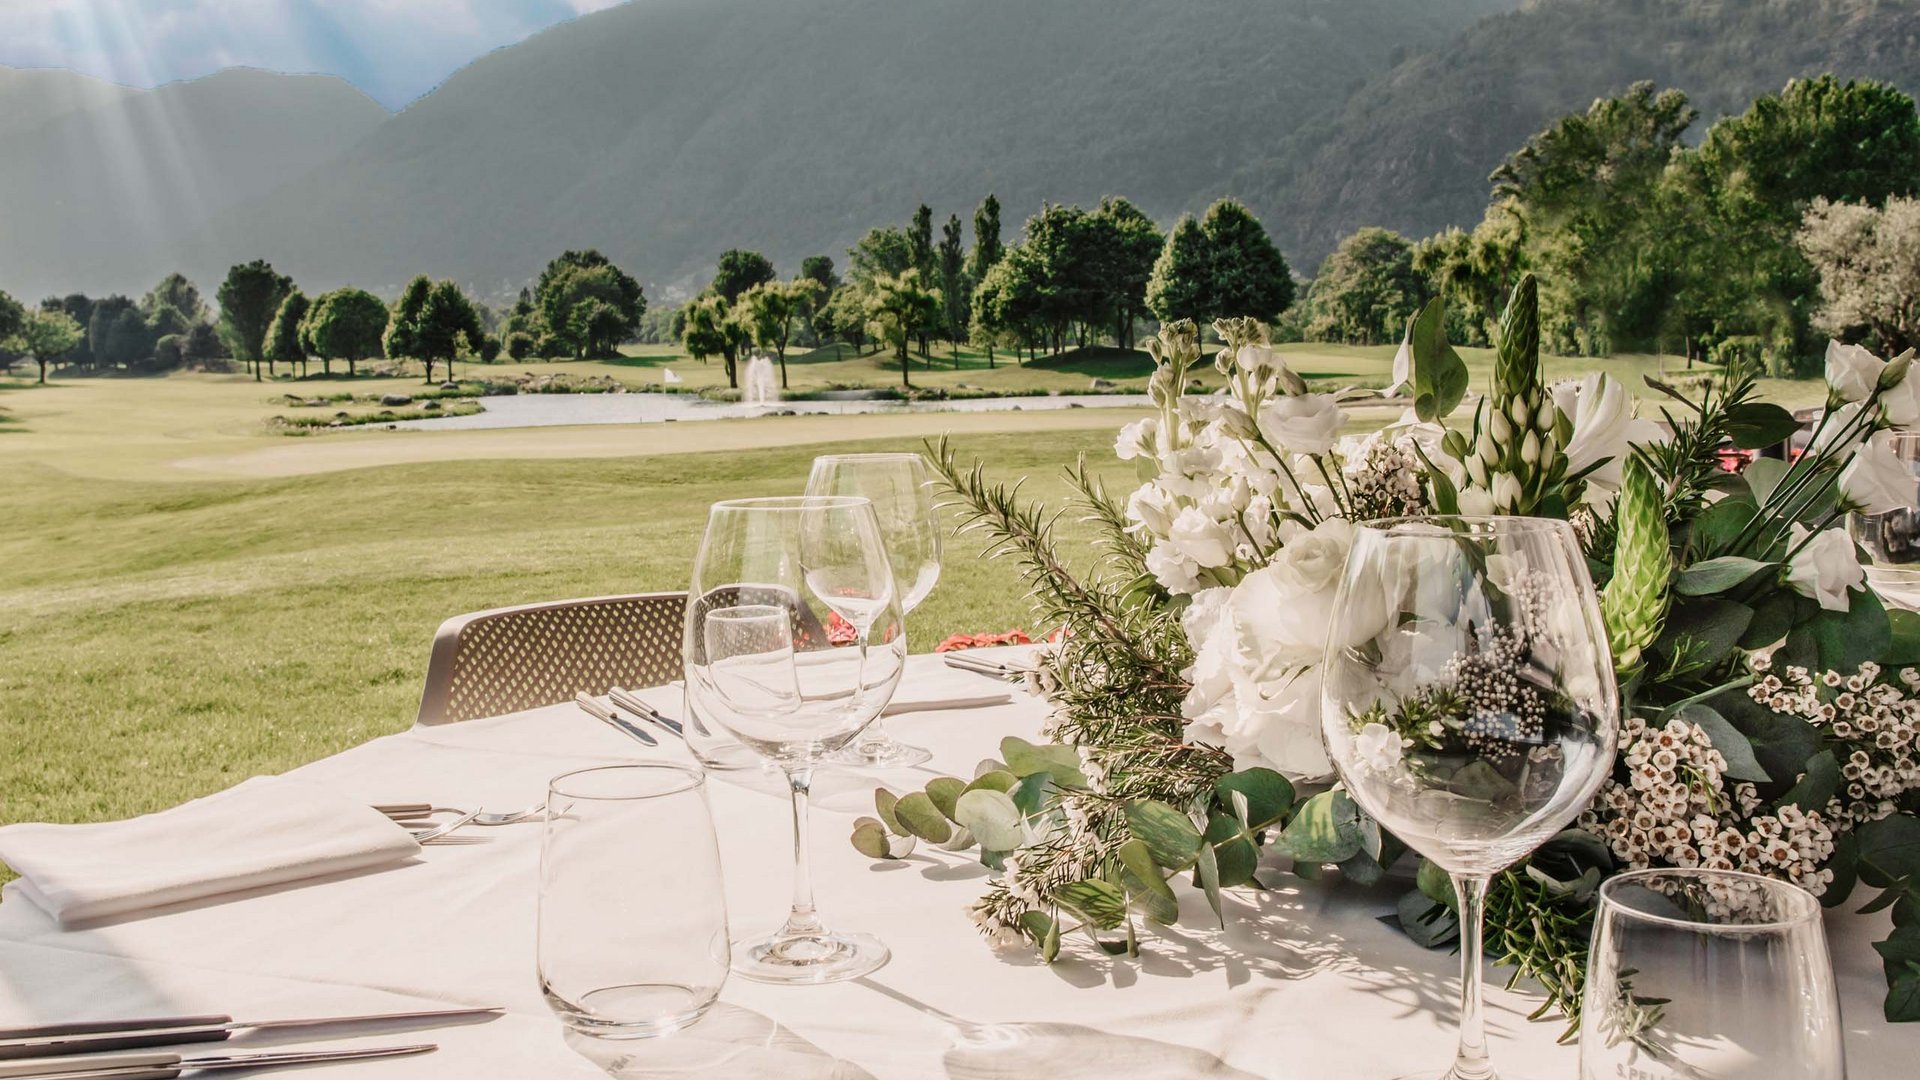 Celebrate in the most stunning event location in Switzerland